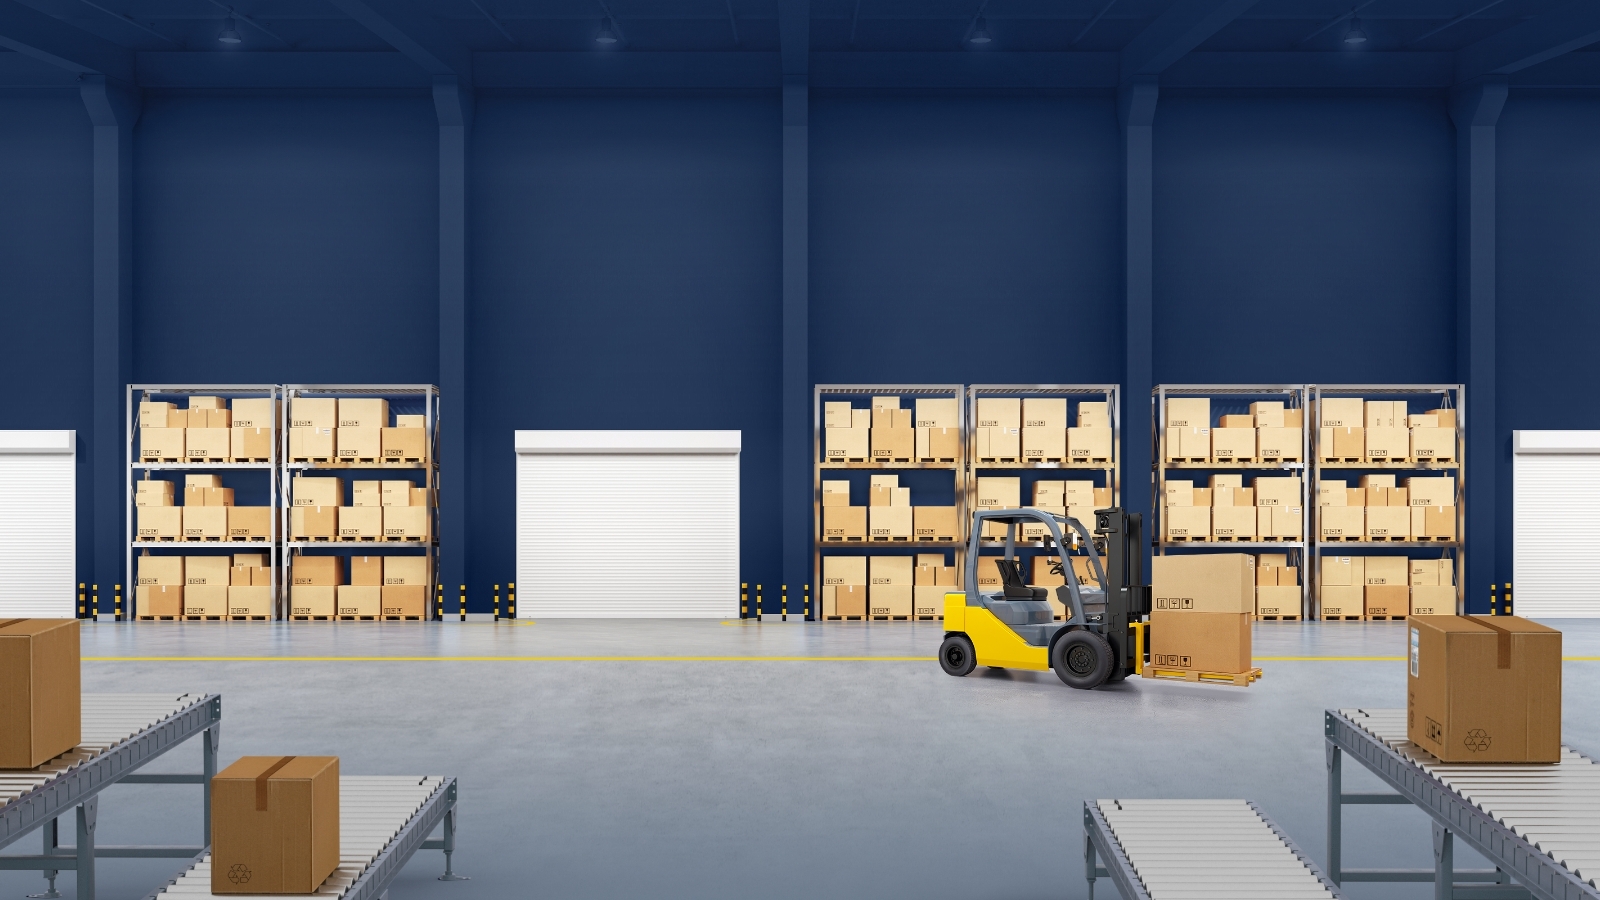 Forklift in warehouse filled with boxes